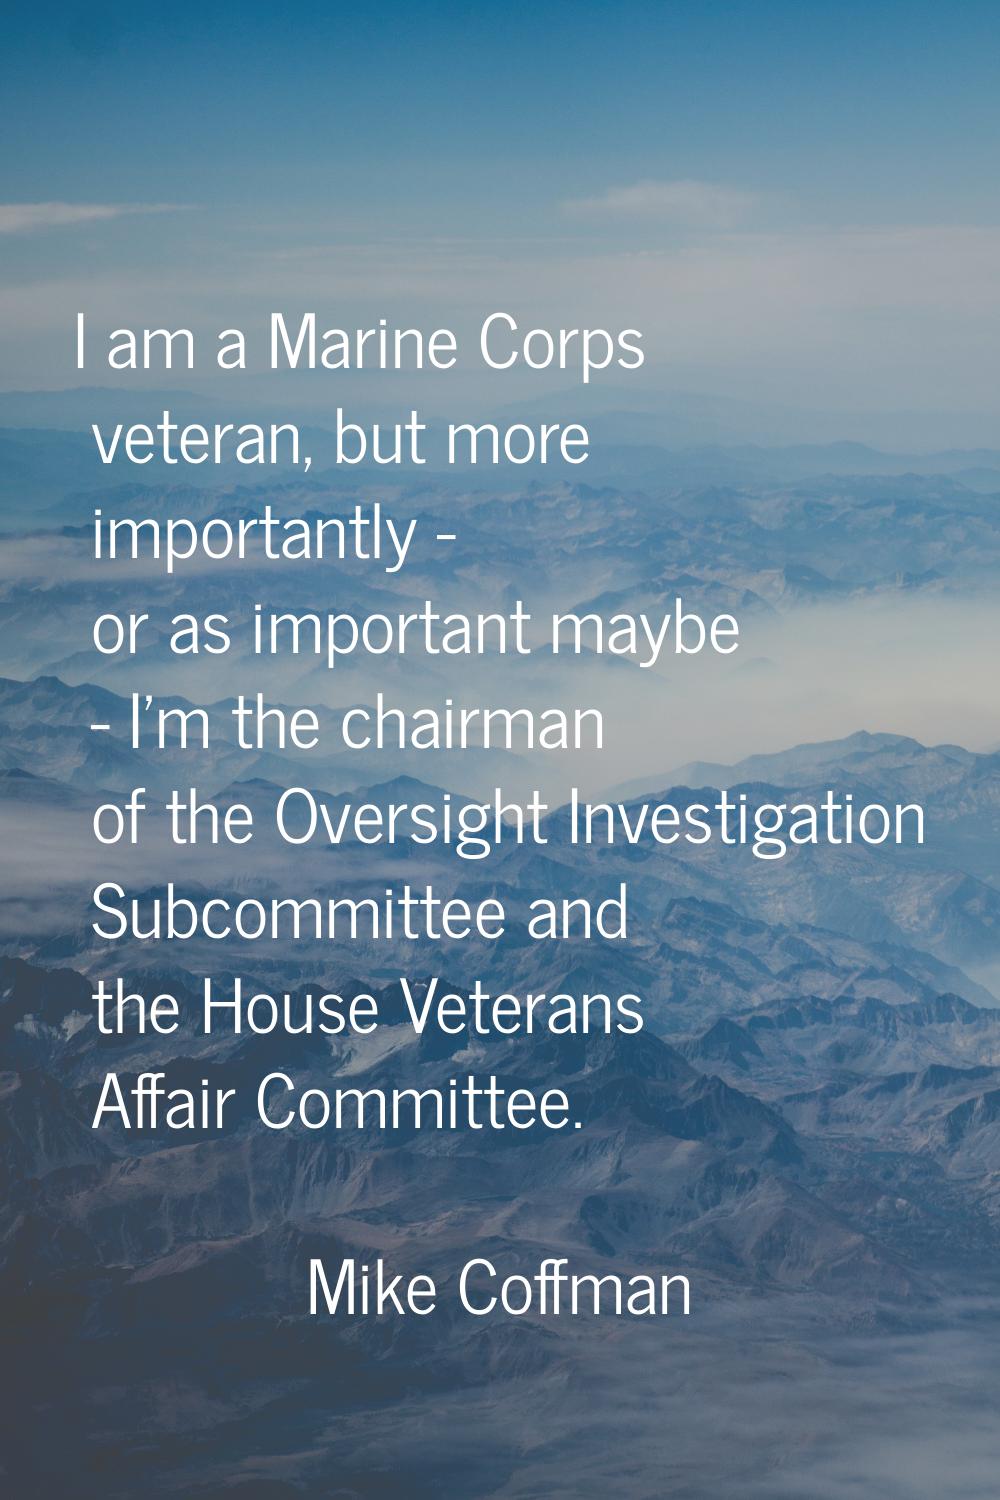 I am a Marine Corps veteran, but more importantly - or as important maybe - I'm the chairman of the